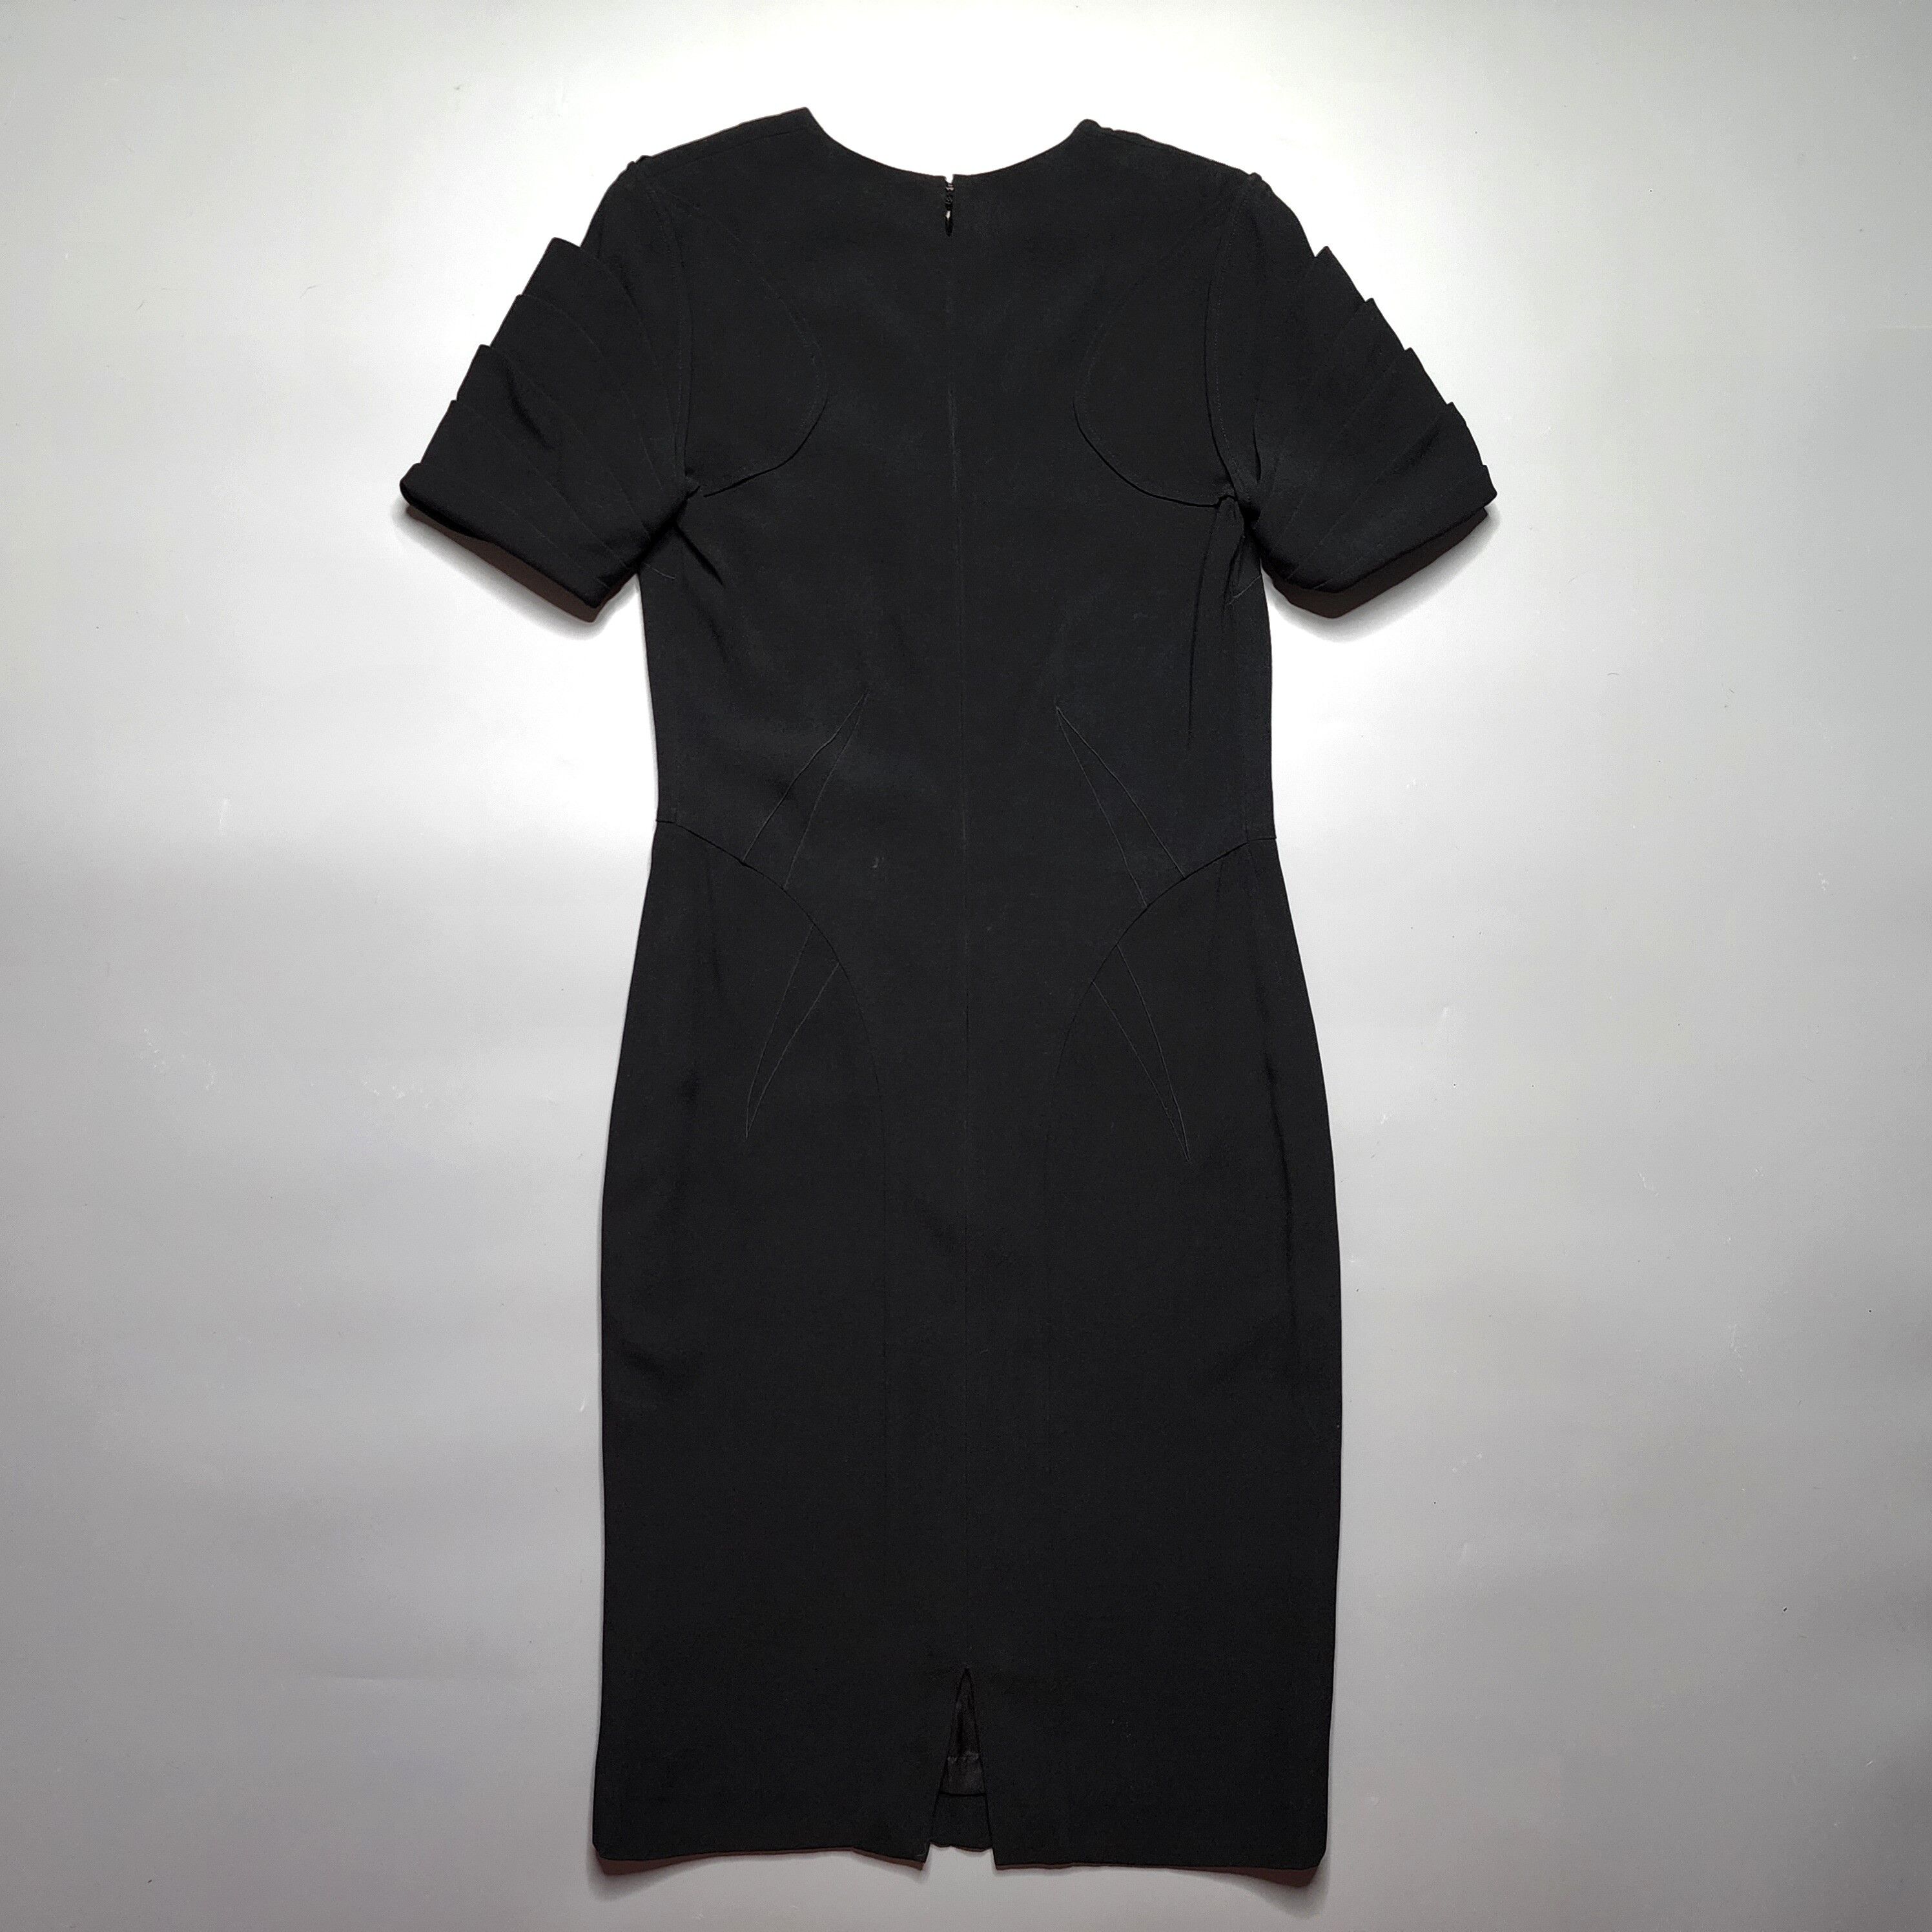 Christian Dior Boutique - Origami Sleeve Dress - 2